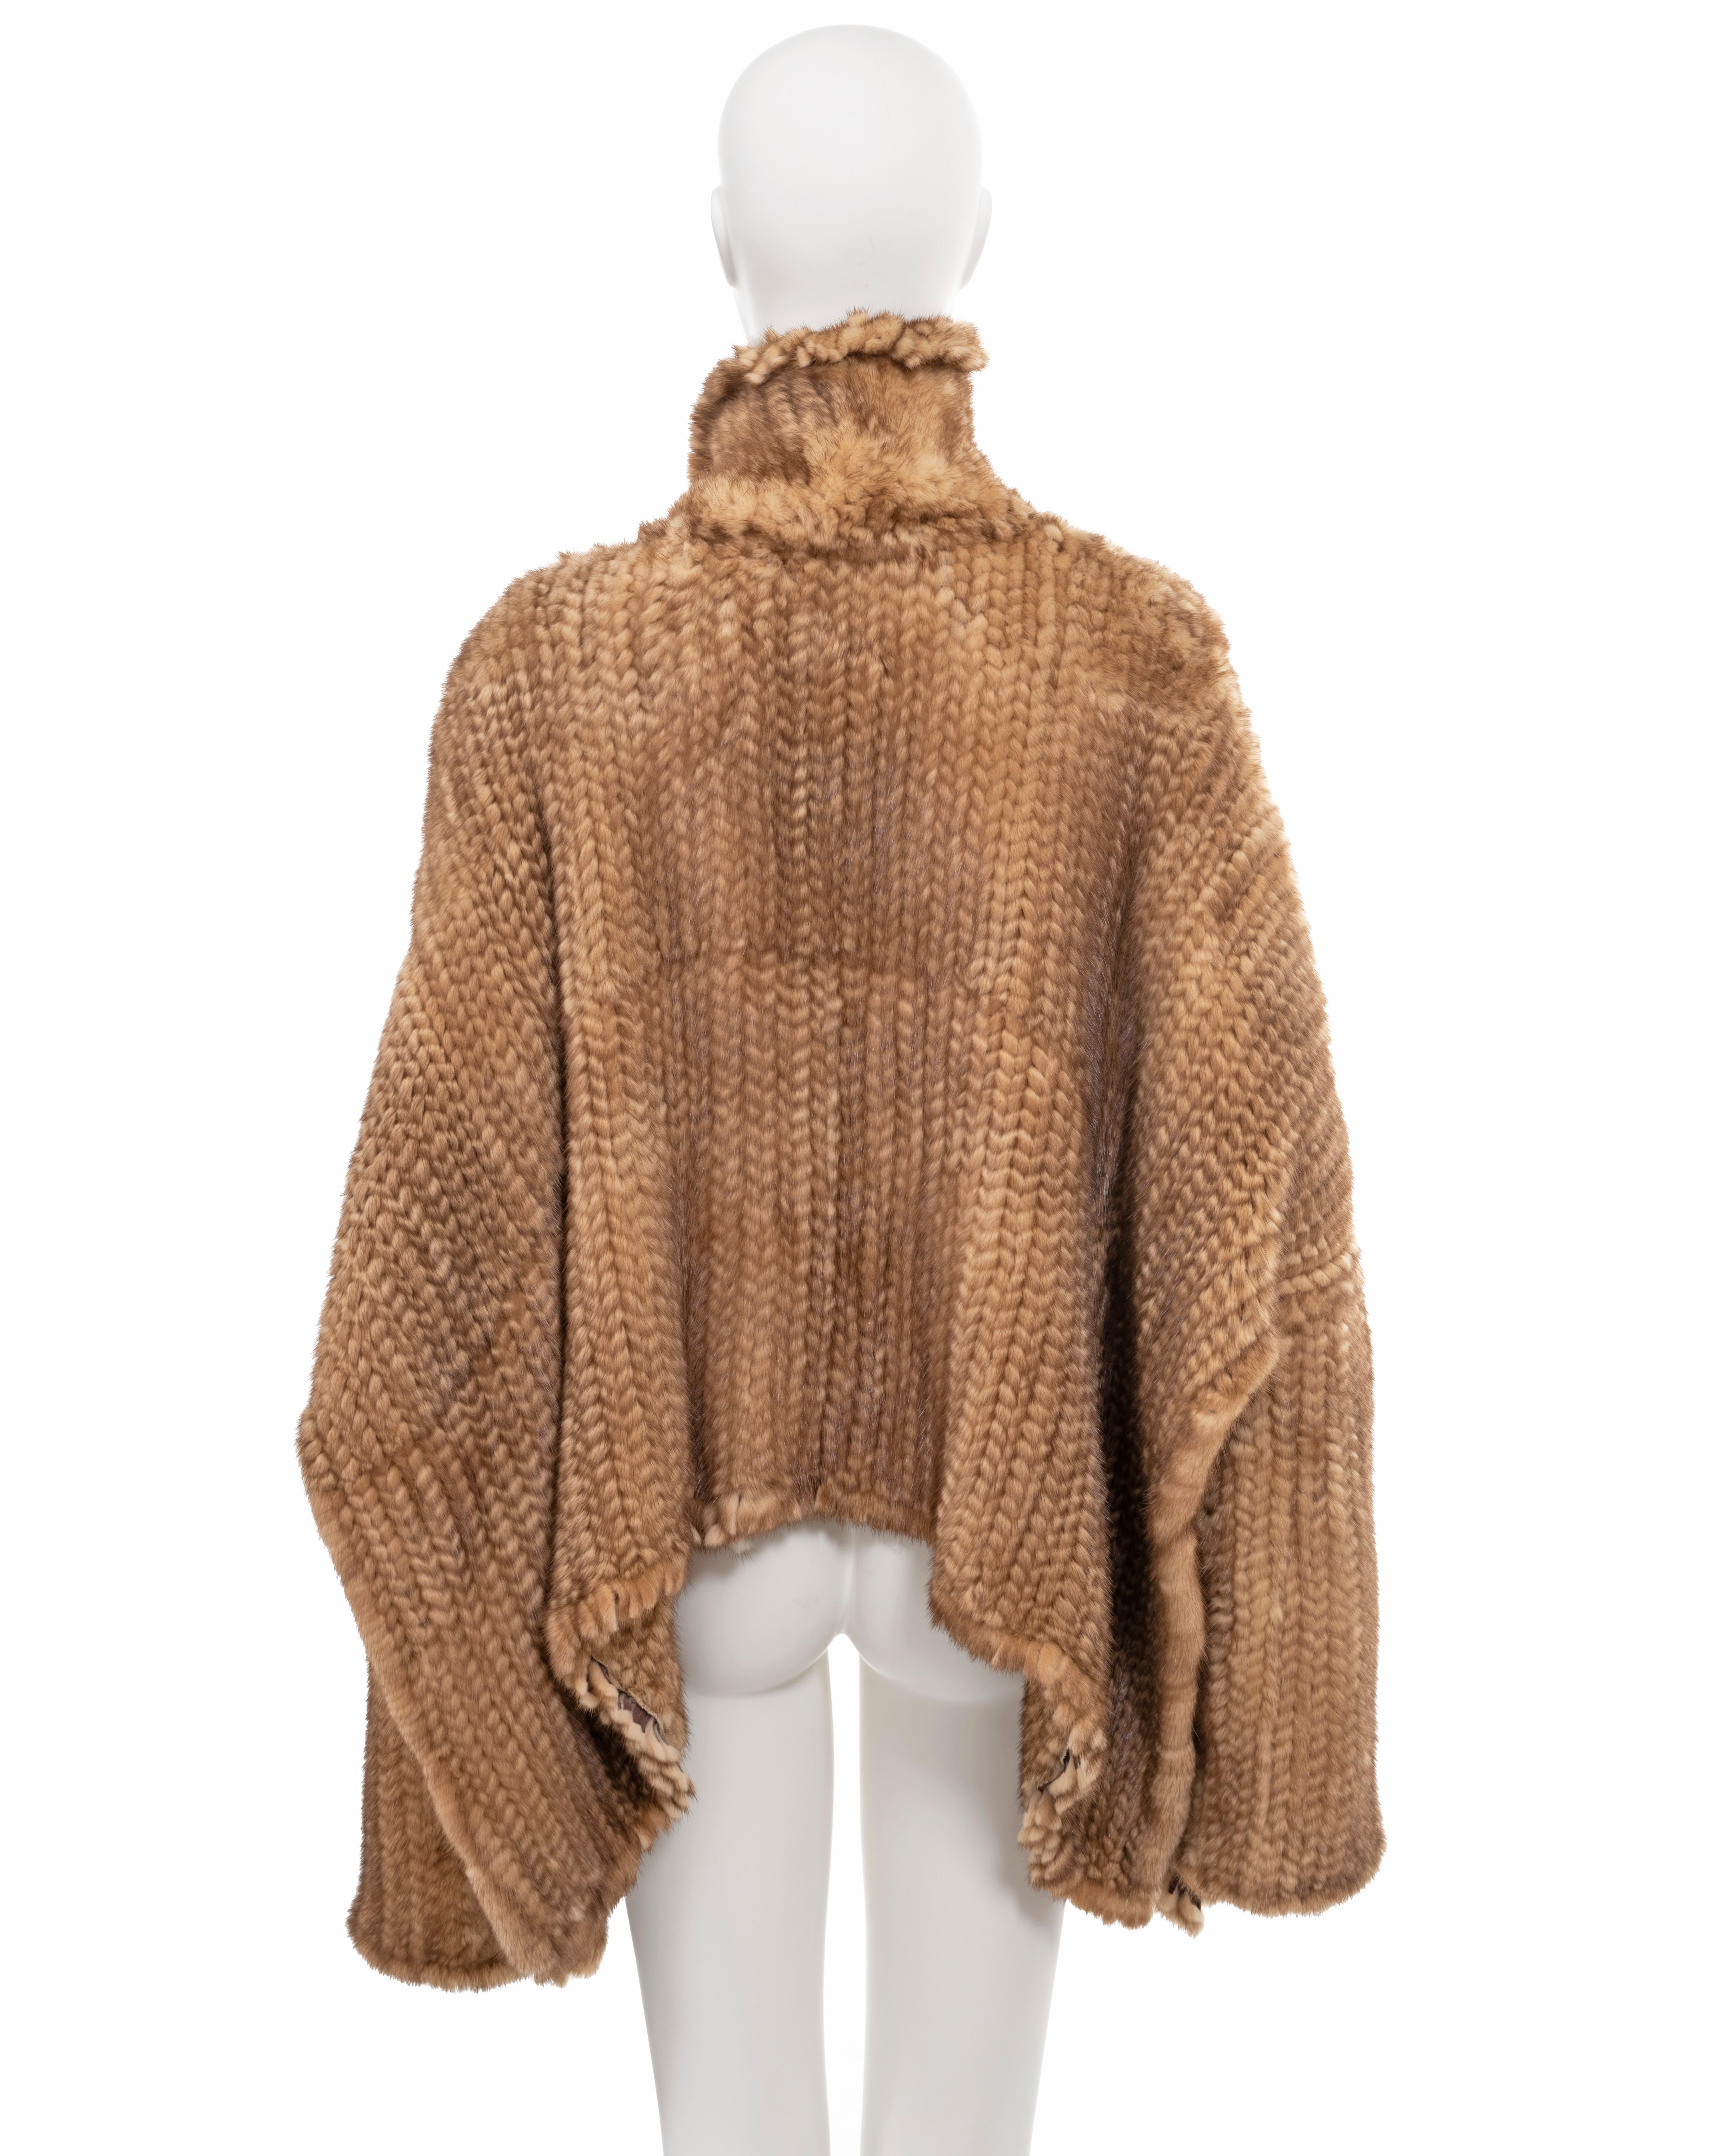 Christian Dior by John Galliano knitted mink fur oversized sweater, fw 2000 For Sale 3